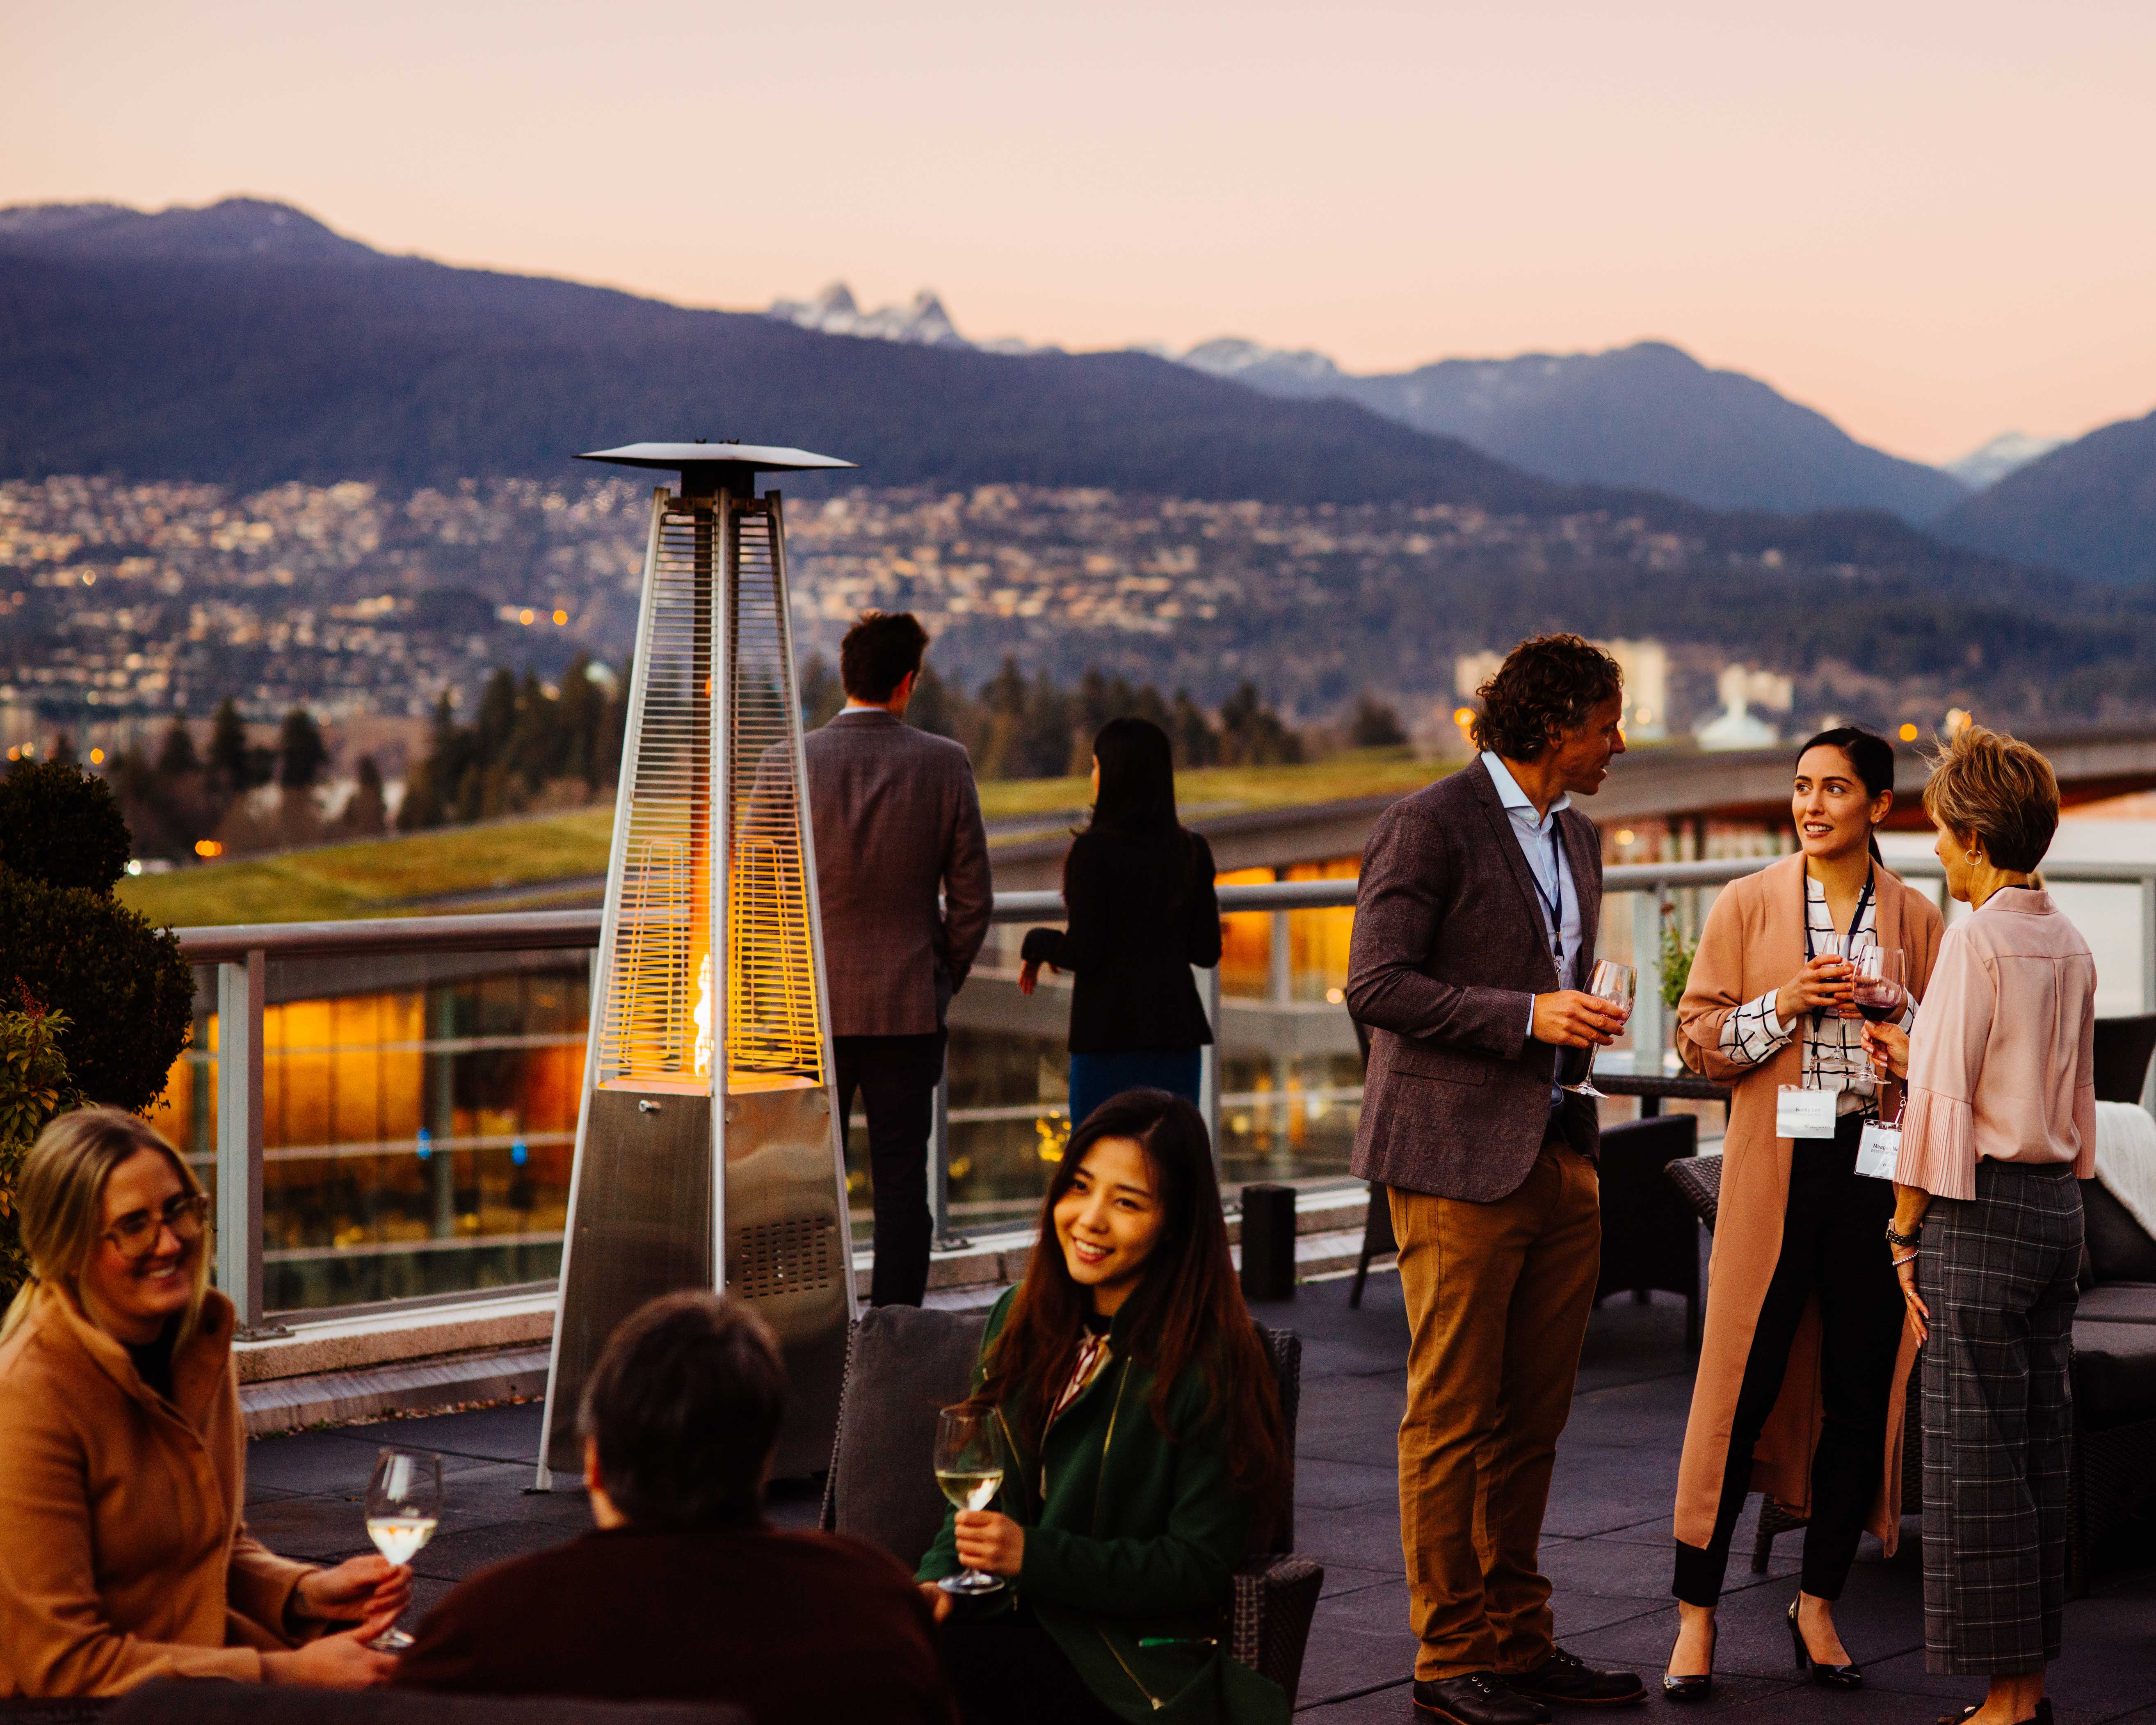 Vancouver vacations: people drinking on roof in Vancouver at sunset with the mountains in the background.